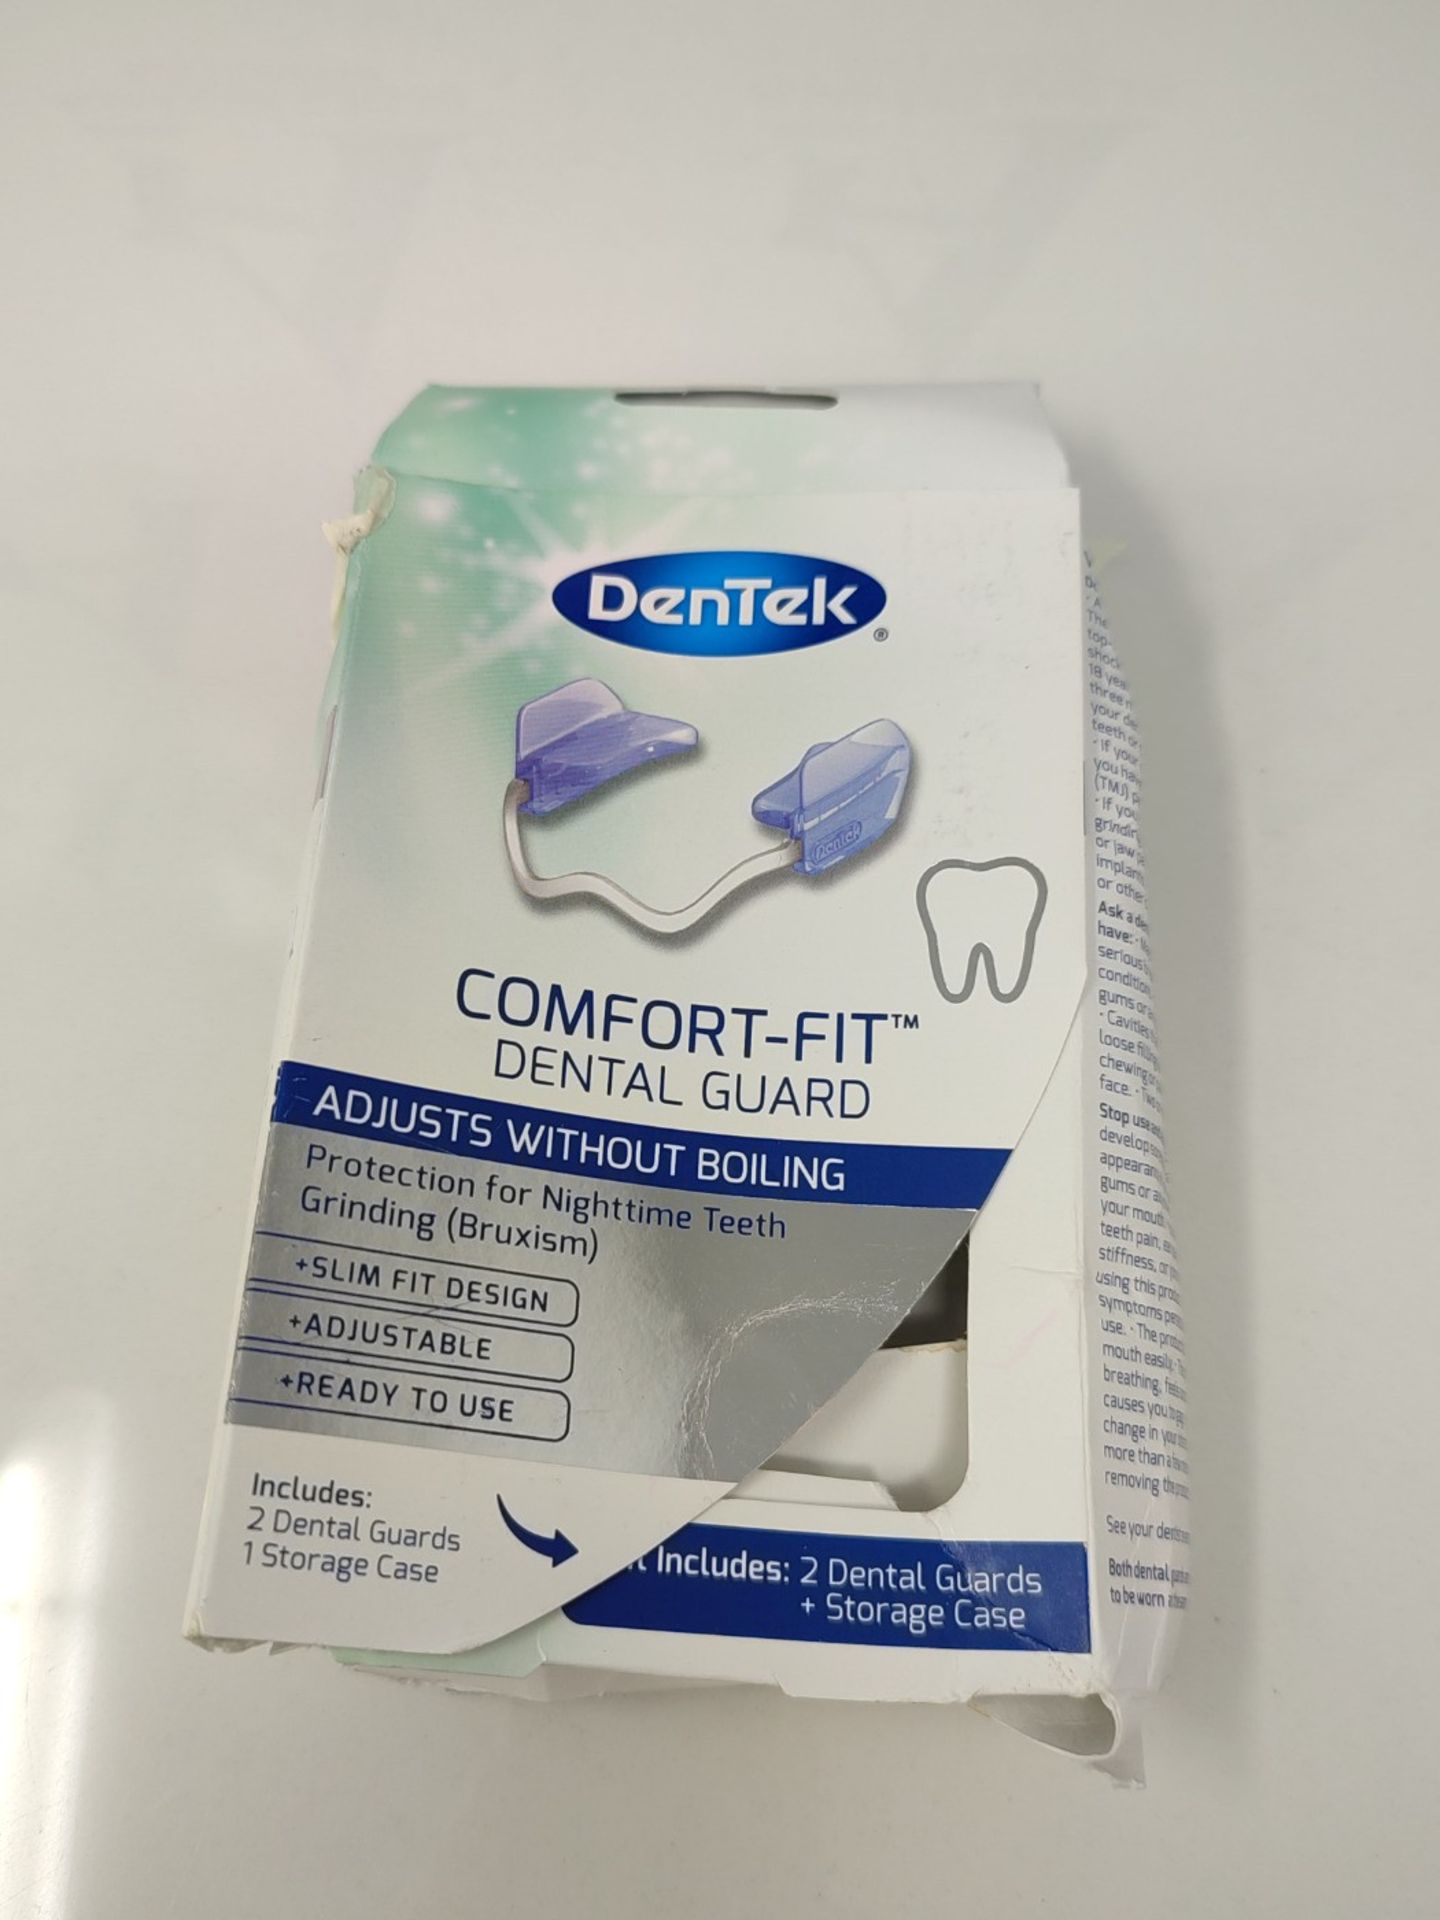 DenTek Comfort-Fit Dental Mouth Guards to Help Prevent Night Time Teeth Grinding and C - Image 3 of 3